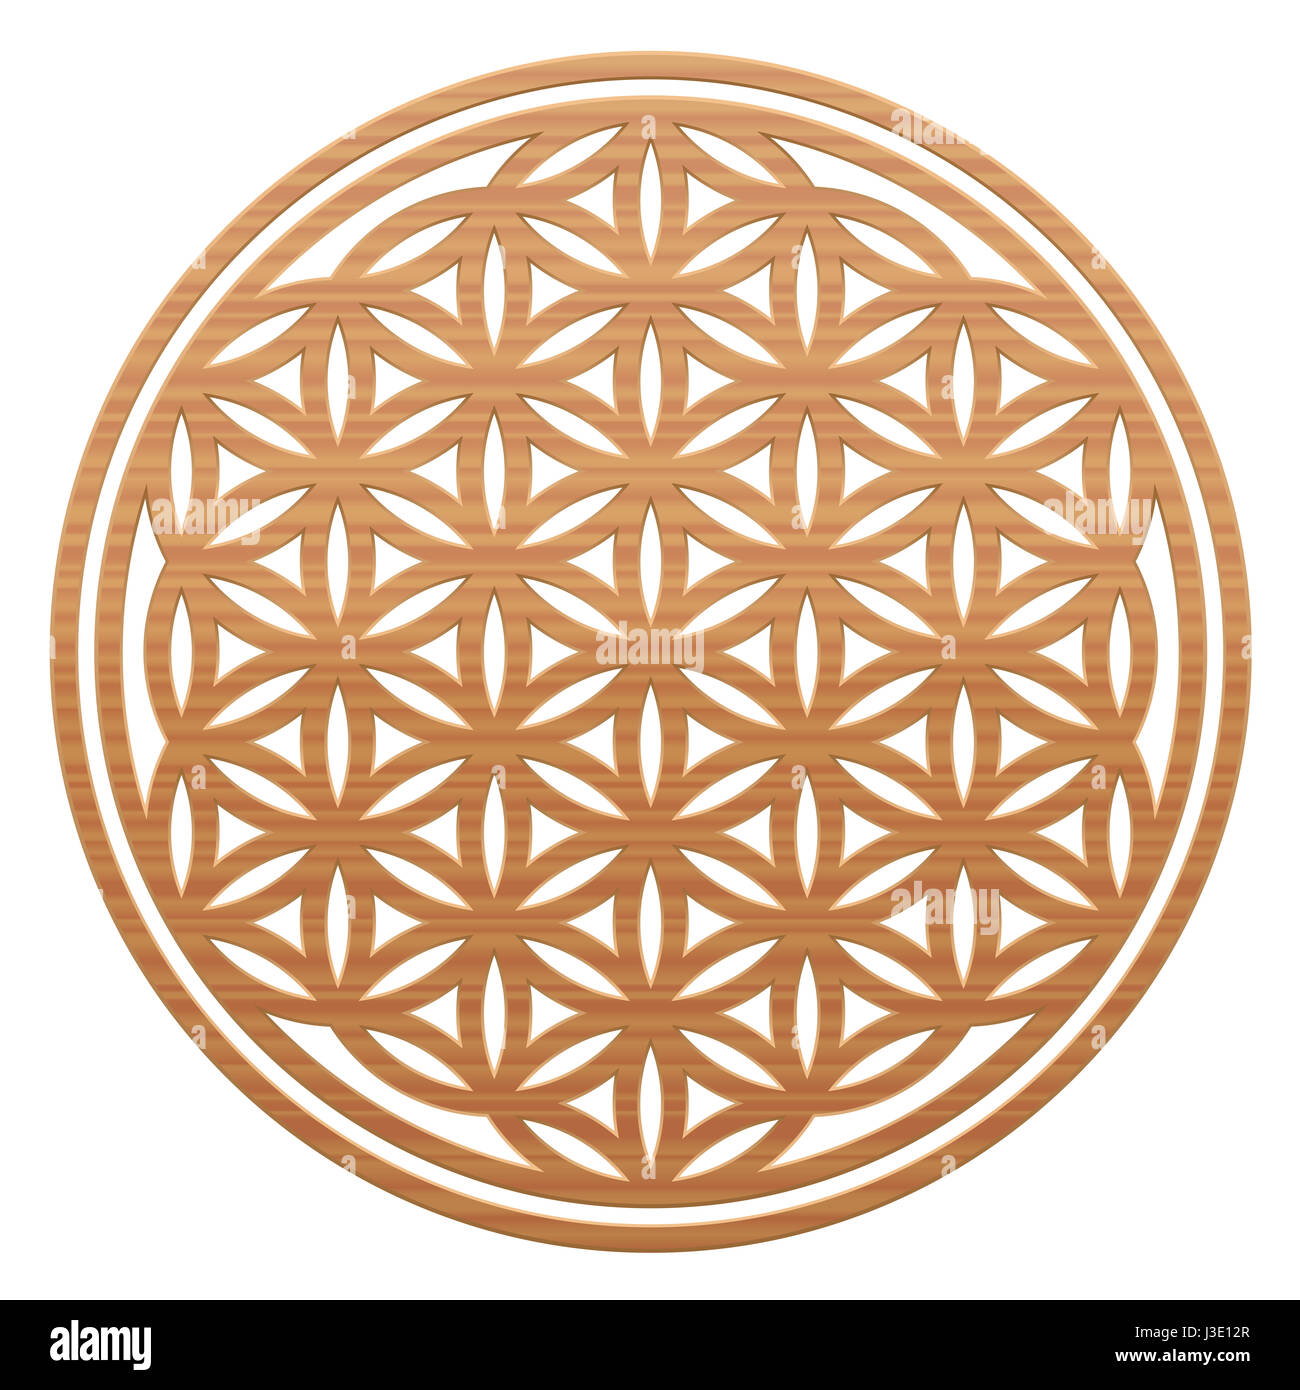 Flower of Life - wooden style, as a symbol for natural spirituality and healing nature - illustration on white background. Stock Photo